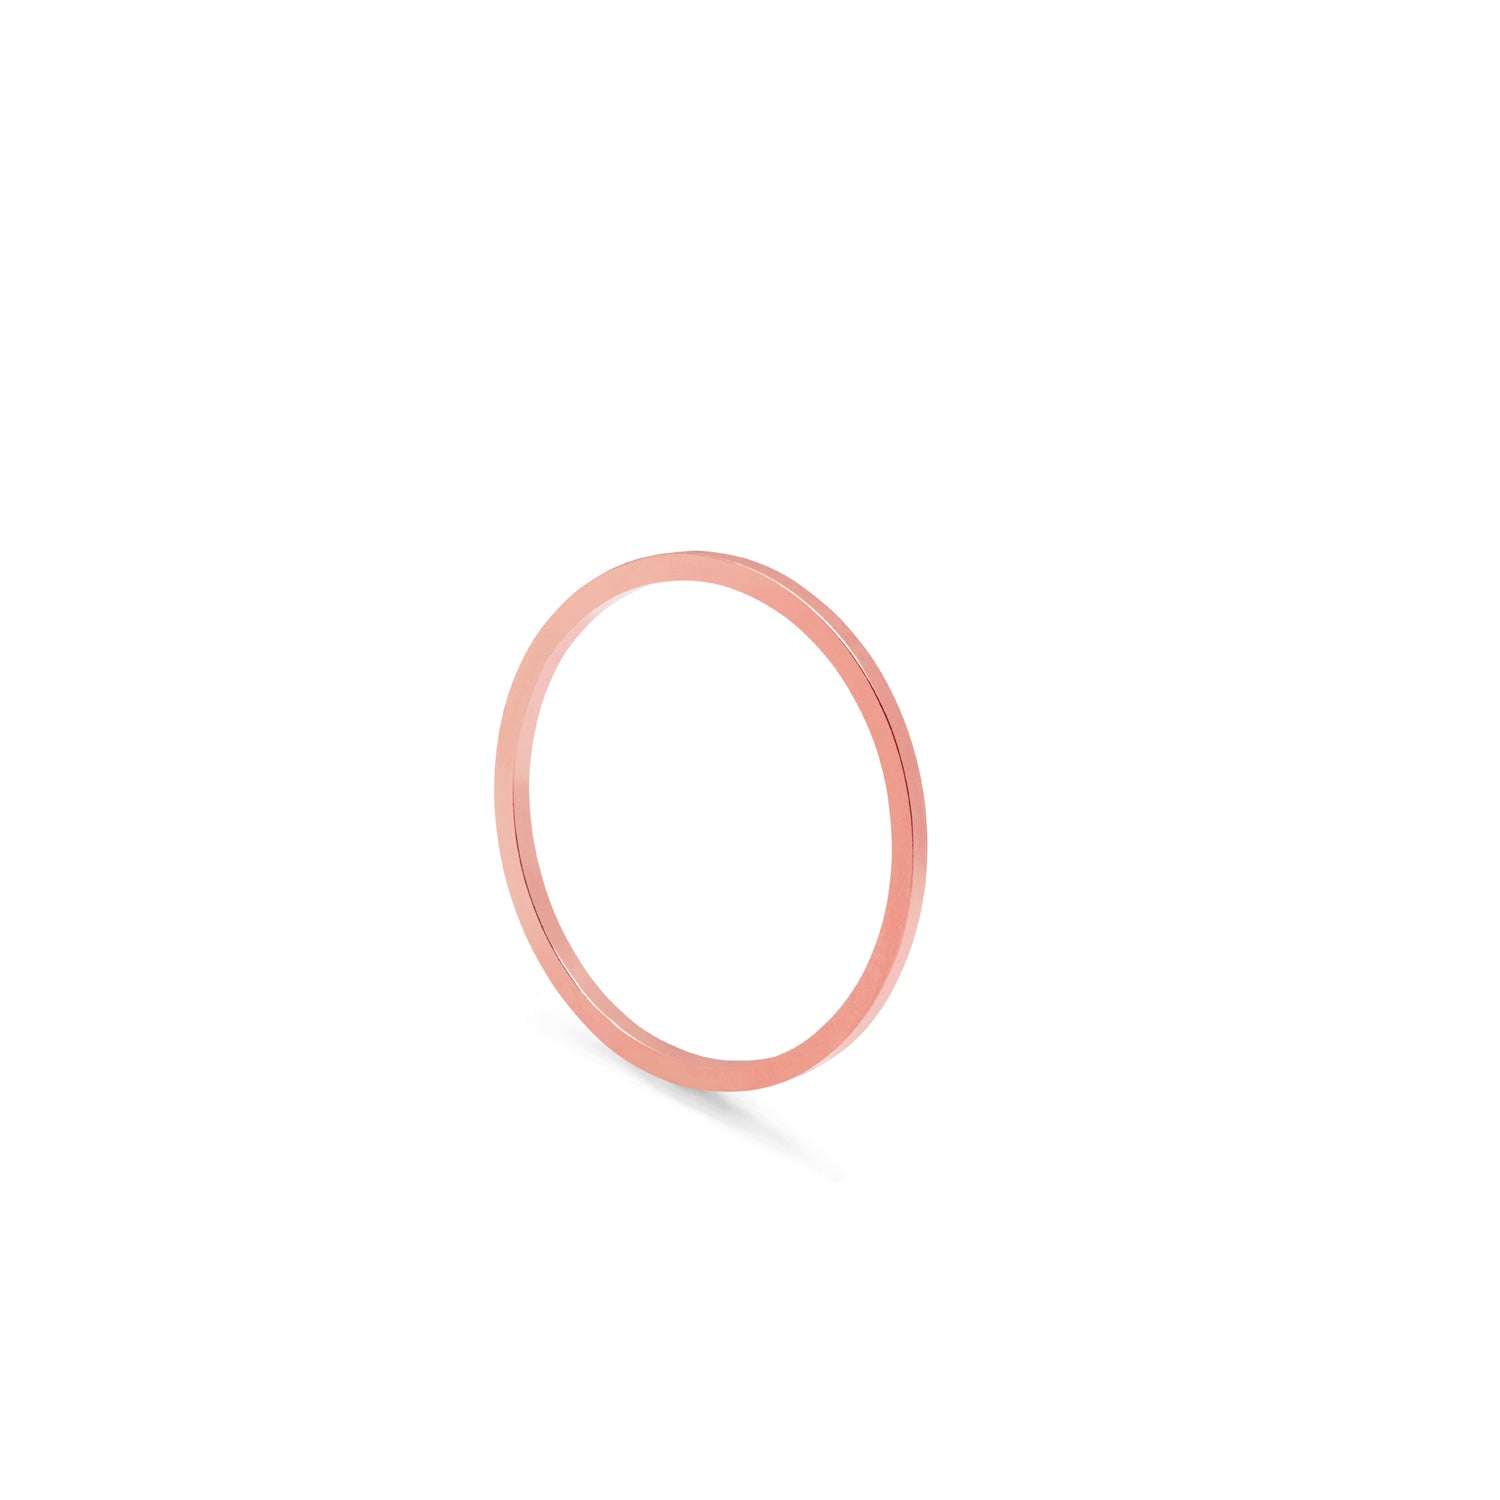 Ultra Skinny Square Stacking Ring - 9k Rose Gold - Myia Bonner Jewellery